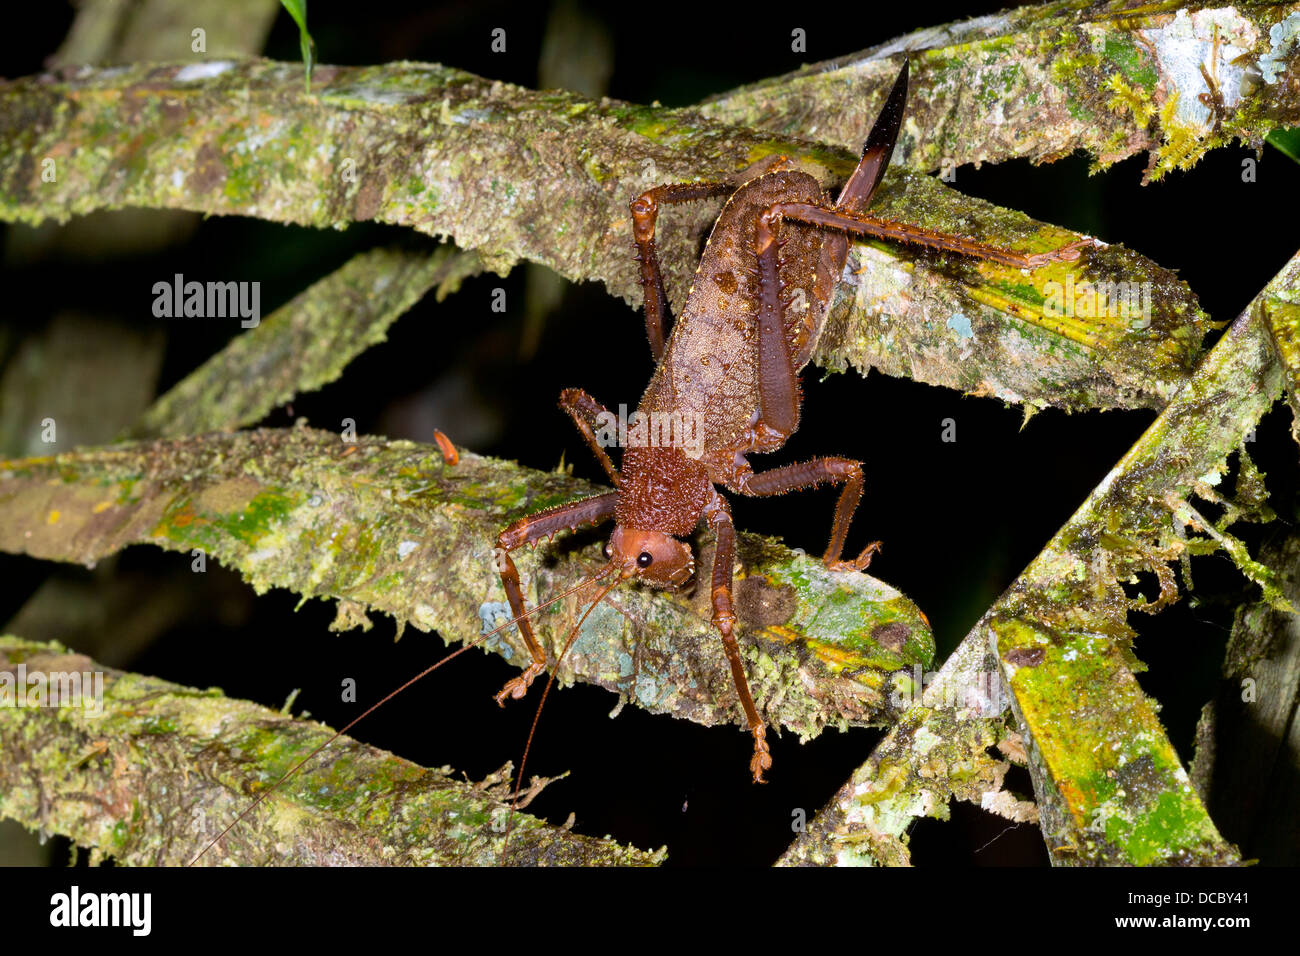 A female giant bush cricket on a textured mossy palm leaf in the rainforest understory at night, Ecuador Stock Photo